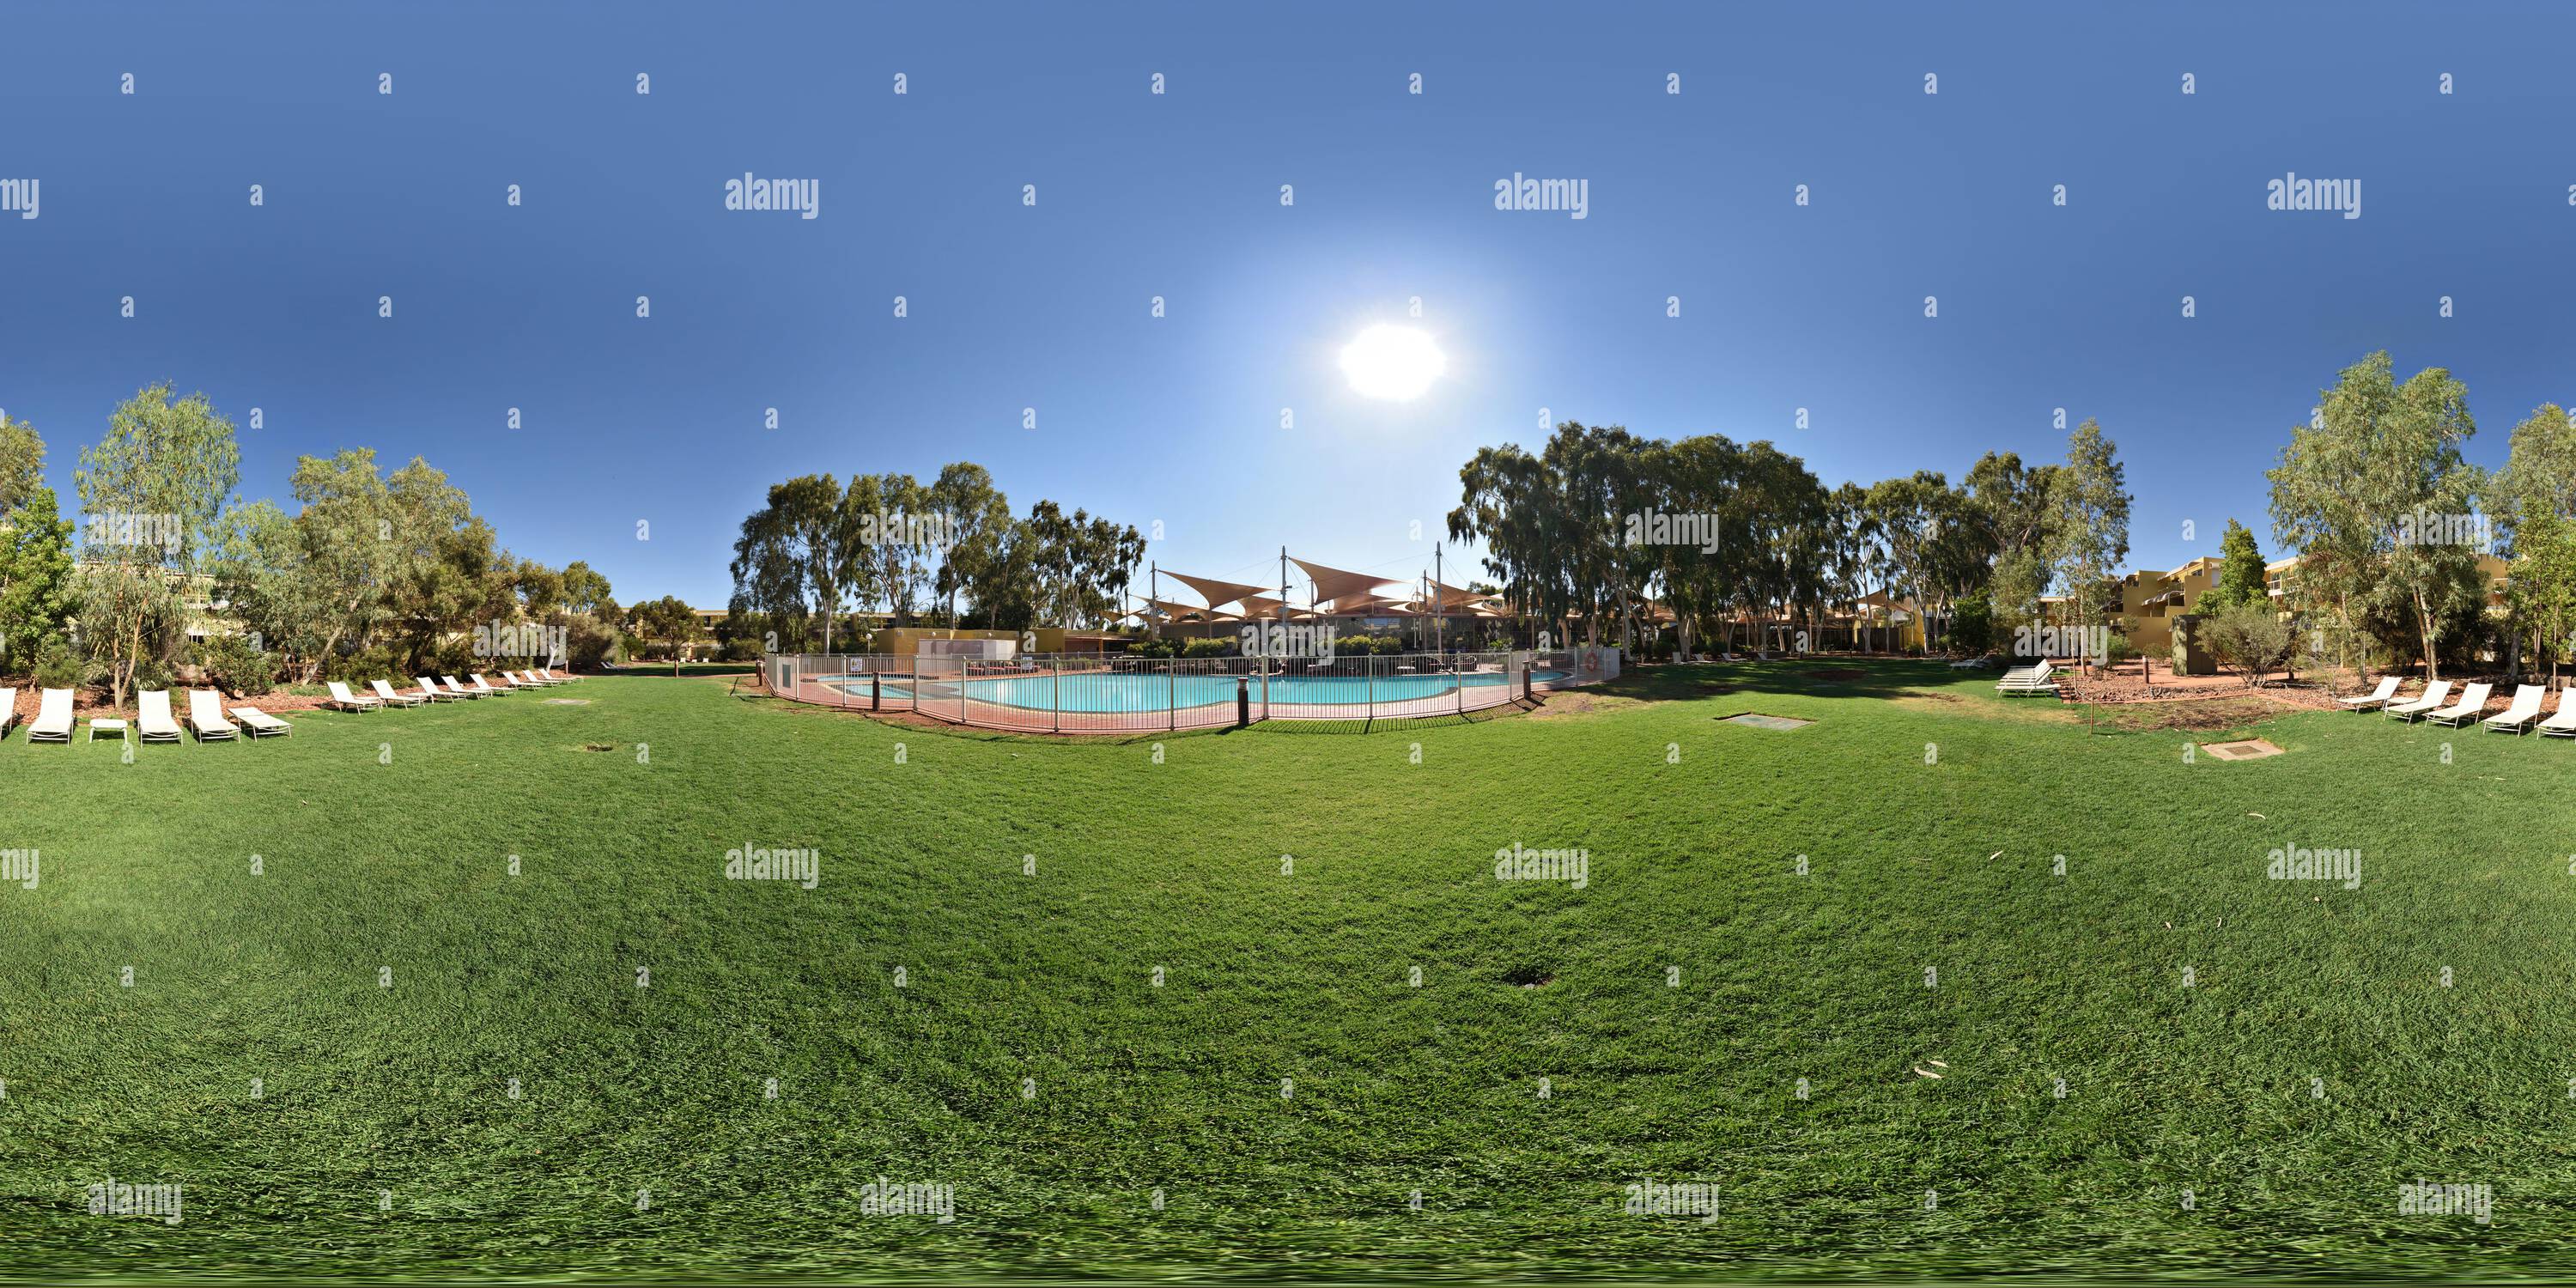 360 degree panoramic view of 360° Panorama of the grassed area with eucalyptus shade trees and fenced pool at Sails Resort, Yulara, Northern Territory, Australia